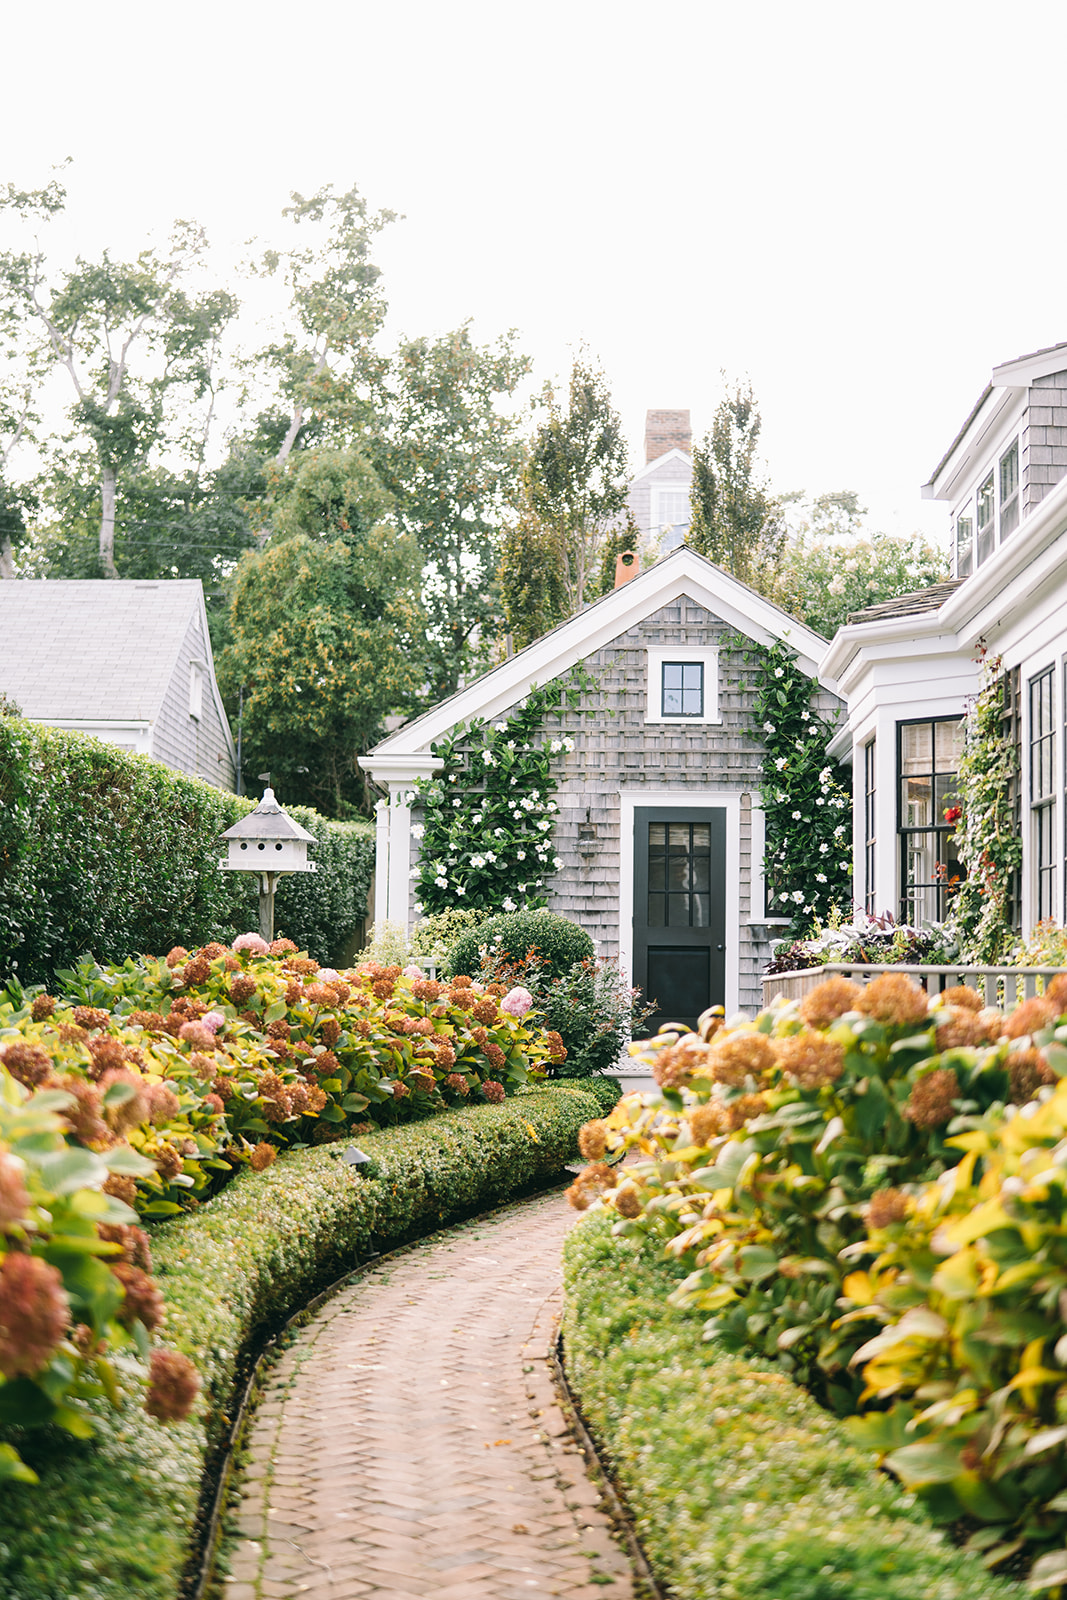 Brick road with many hydrangeas on either side leading to a quaint cottage with flowers climbing up the front in Nantucket